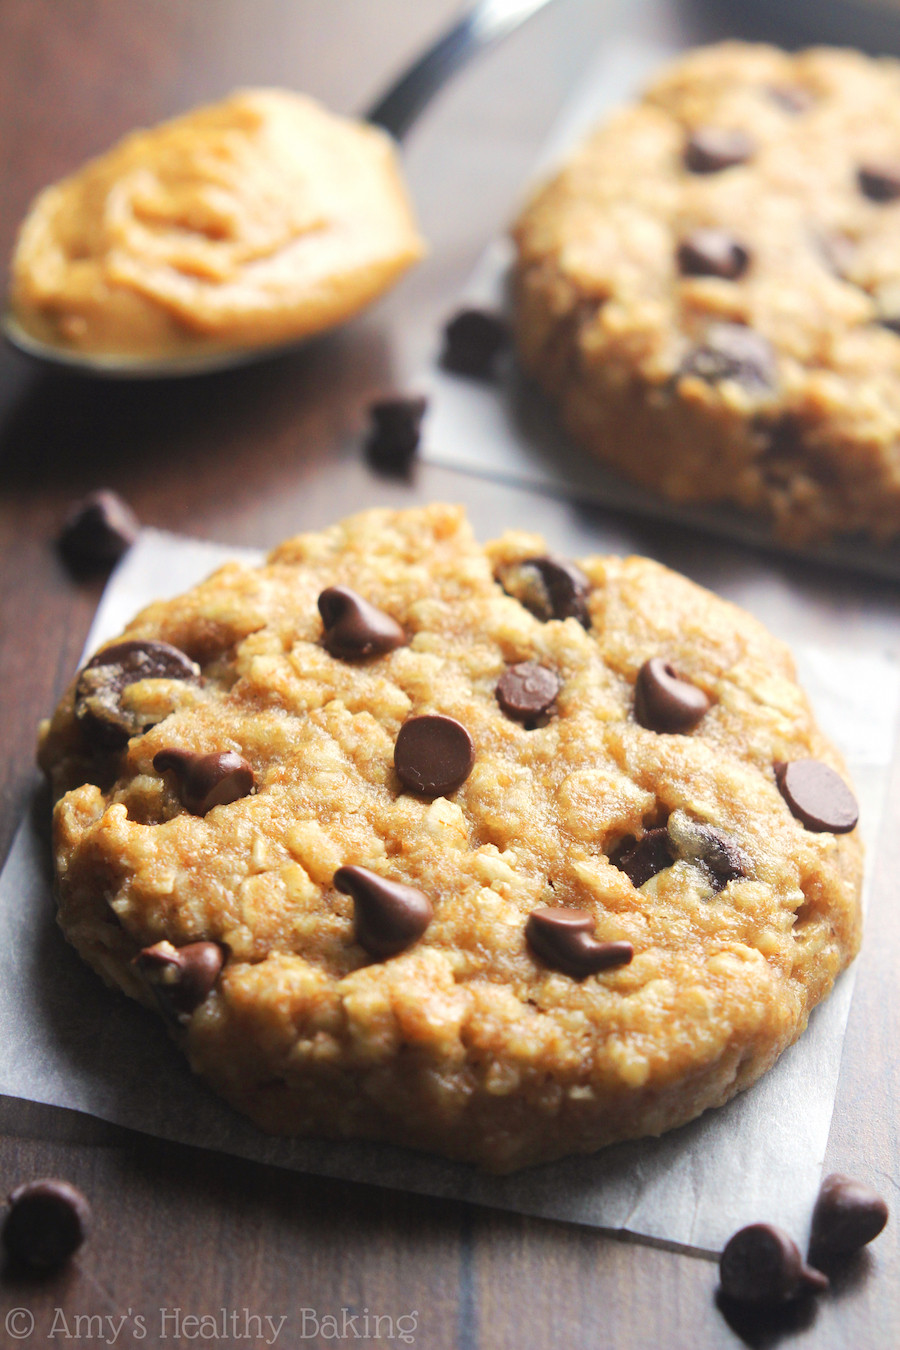 Healthy Peanut Butter Oatmeal Chocolate Chip Cookies
 Chocolate Chip Peanut Butter Oatmeal Cookies Recipe Video